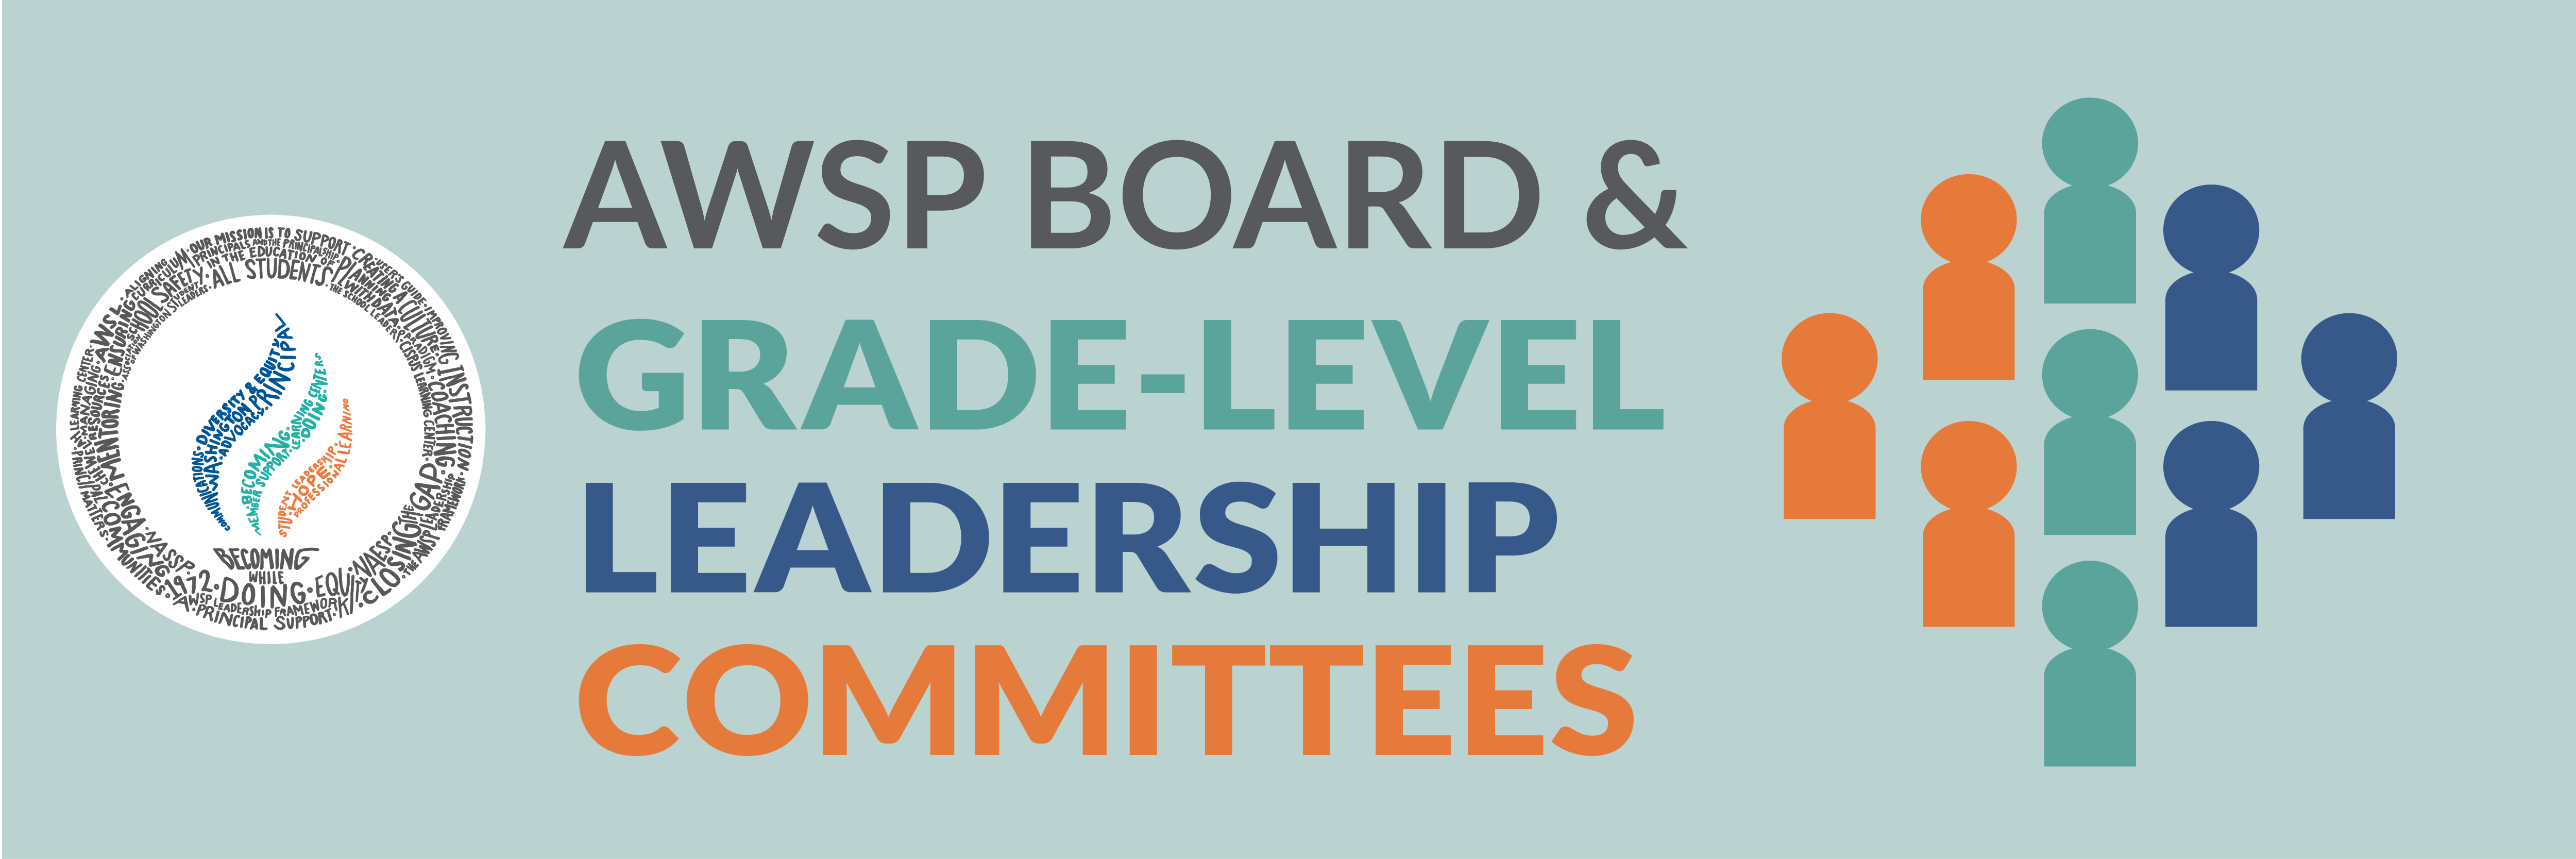 image of the AWSP logo with text that says AWSP Board and Grade Level LEadership Committees and some icons of people